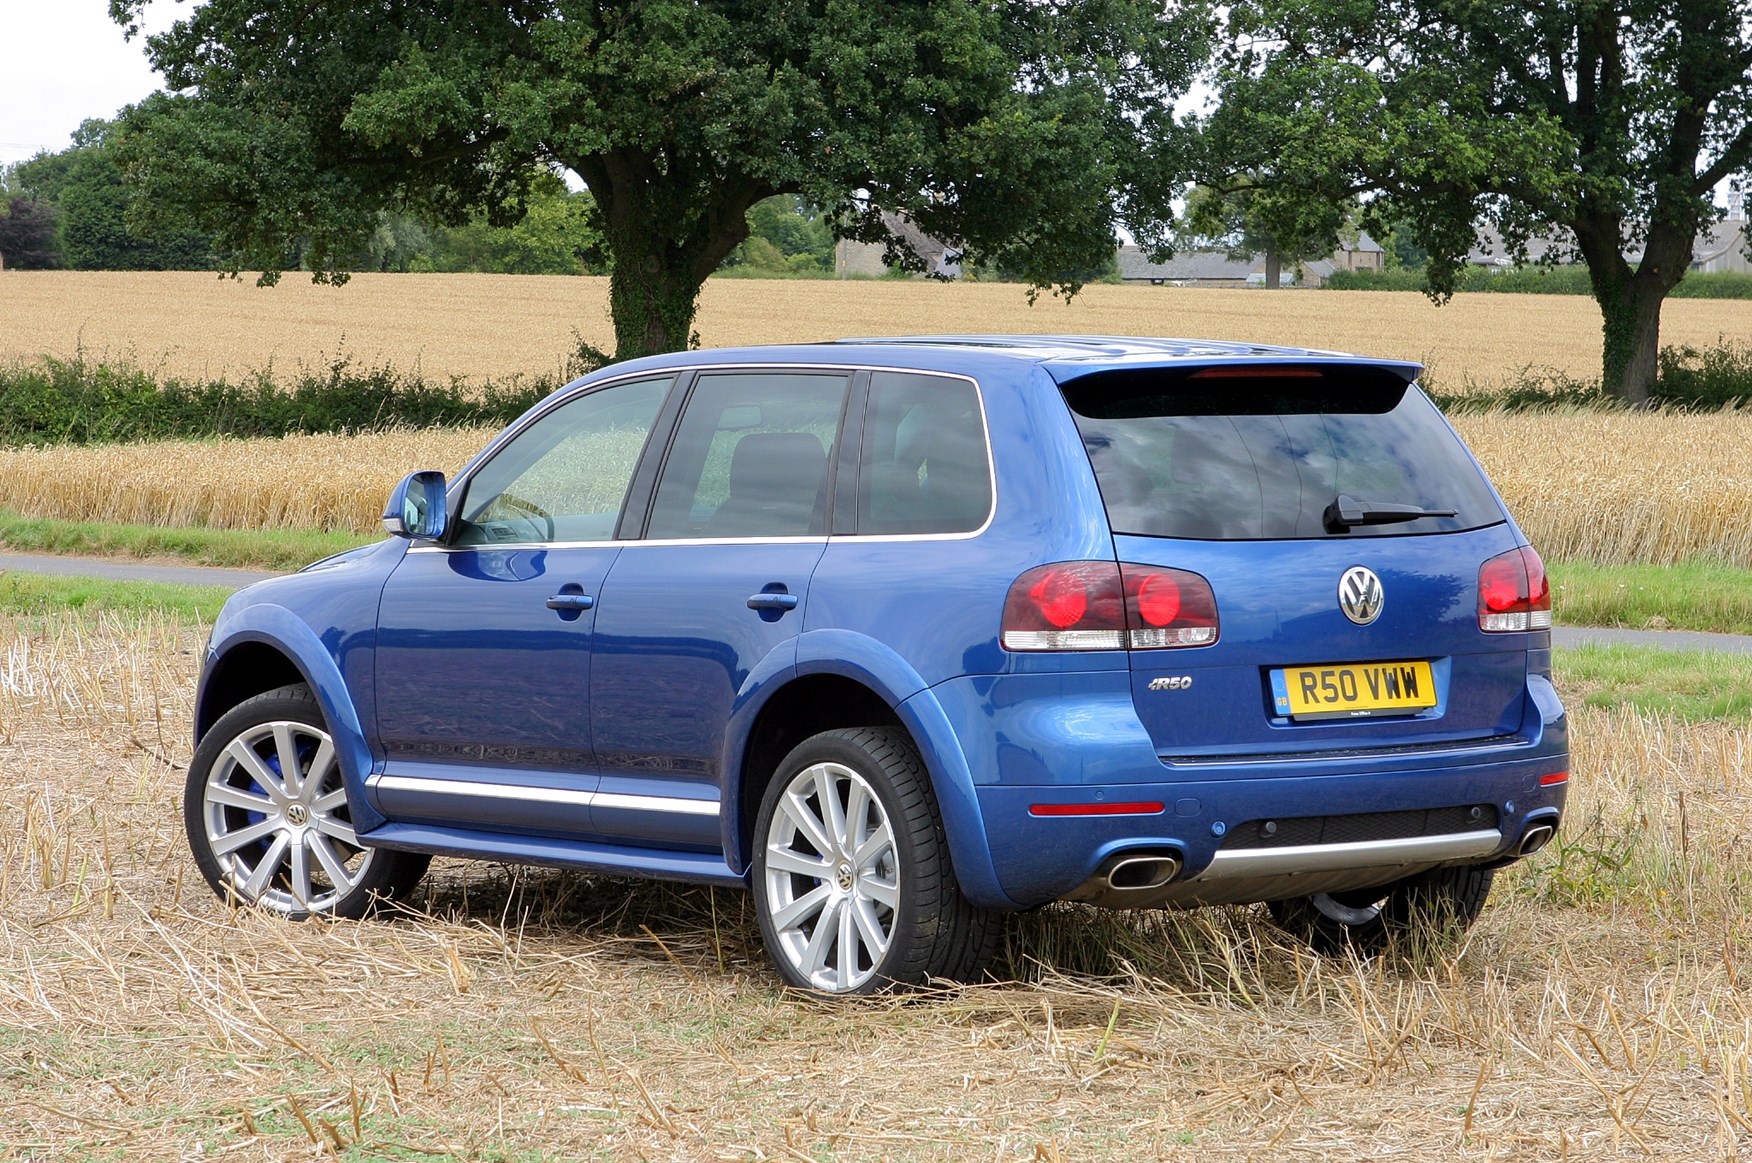 Used Volkswagen Touareg R50 (2008 - 2009) Review | Parkers